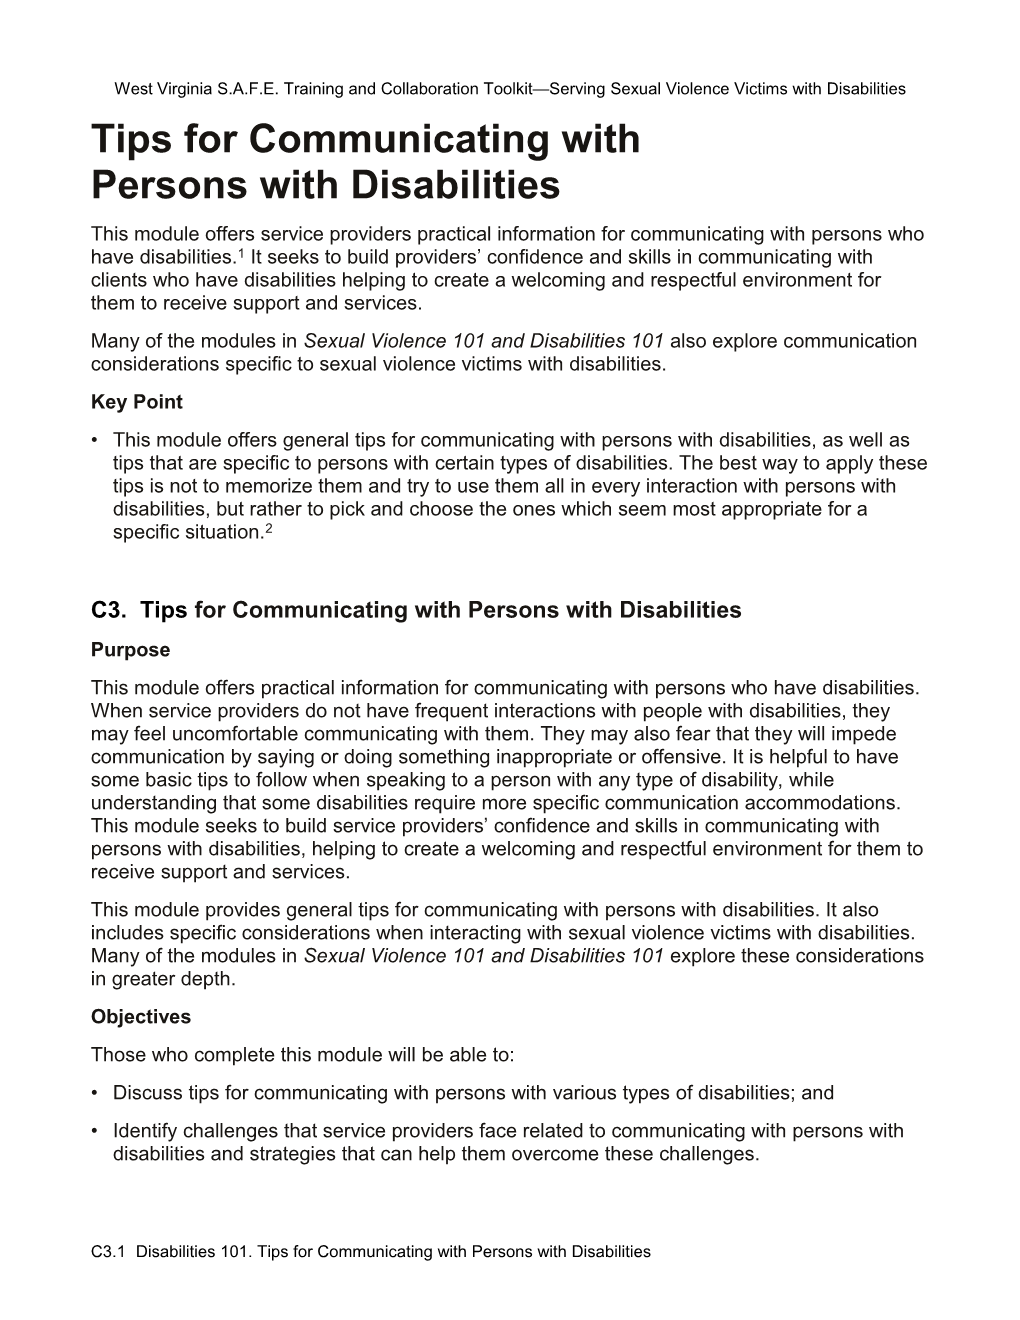 C3. Disabilities 101. Tips for Communicating with Persons with Disabilities